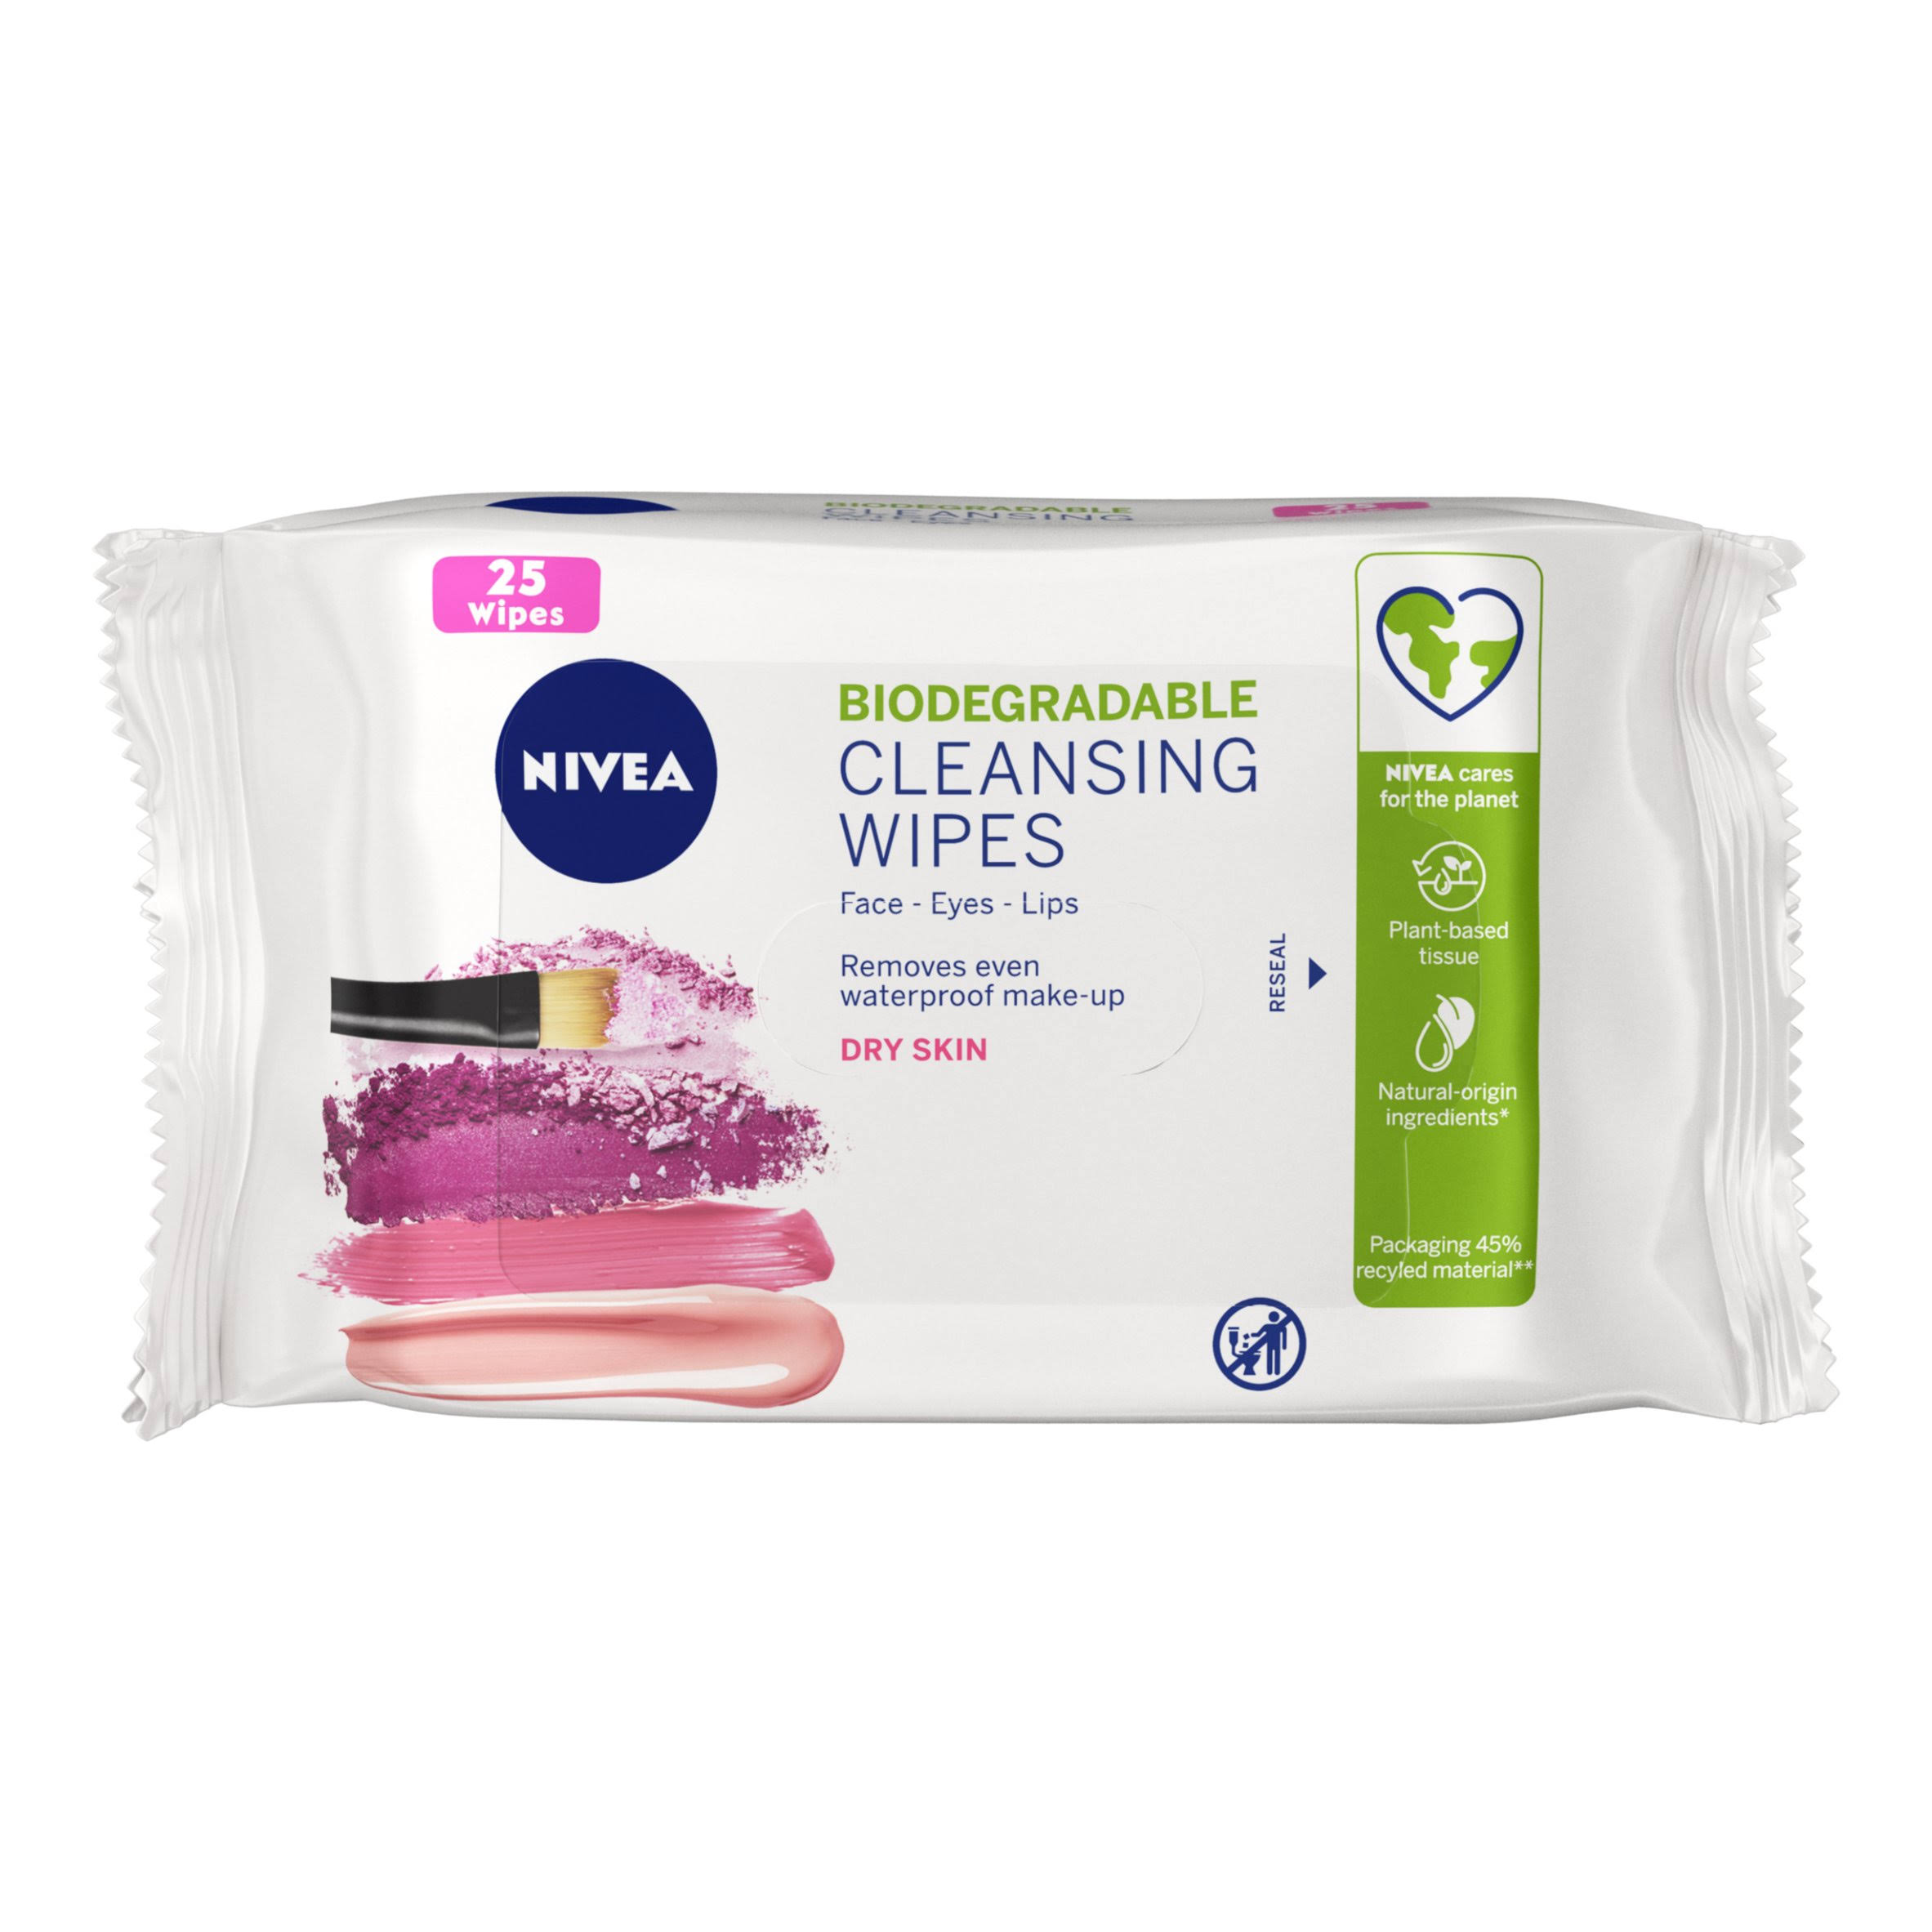 Nivea Biodegradable Cleansing Wipes For Dry Skin